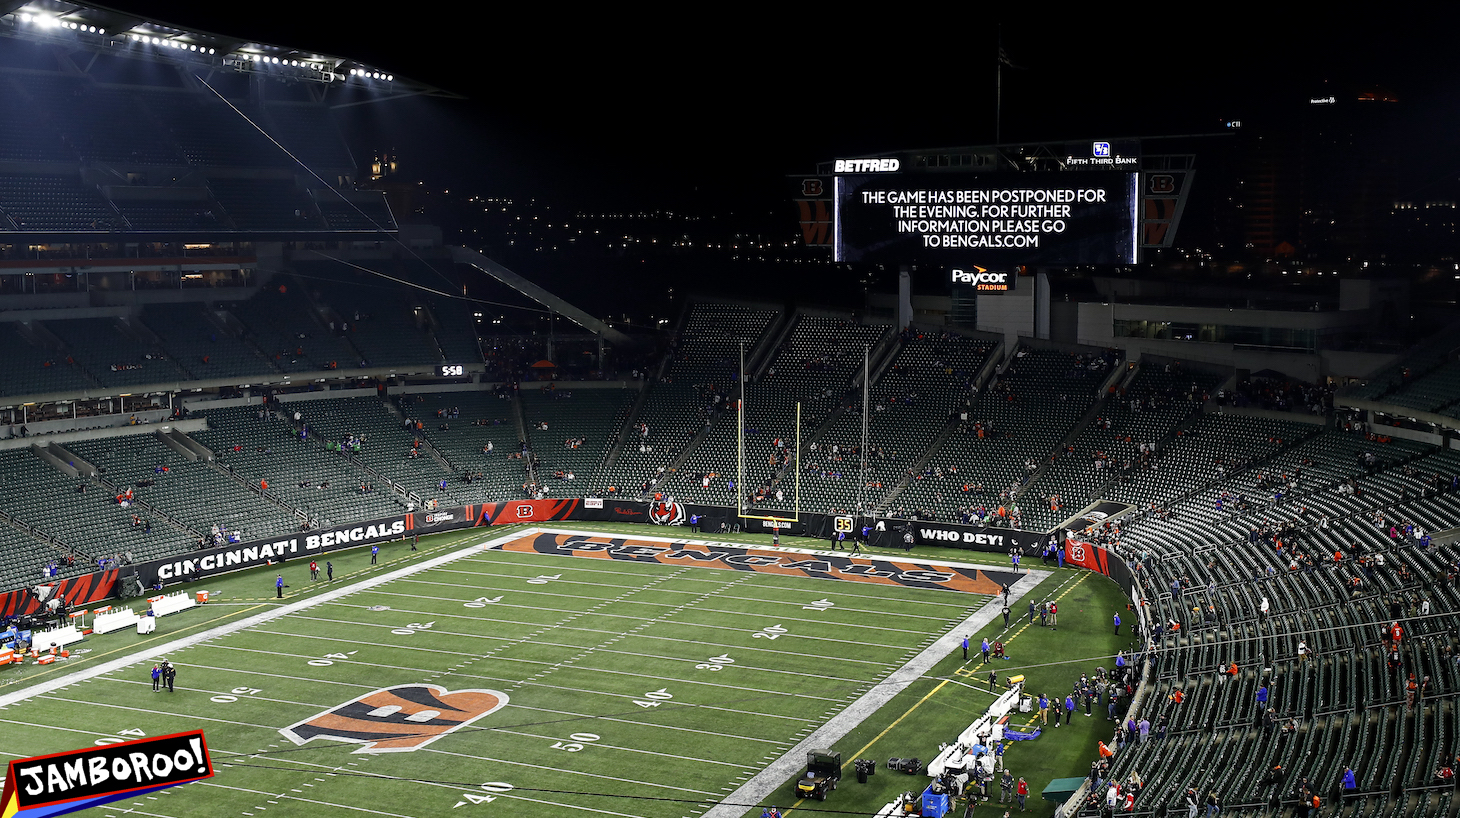 CINCINNATI, OH - JANUARY 2: A Paycor Stadium video board reads that the game between the Buffalo Bills and the Cincinnati Bengals is suspended due to an injury sustained by Bills safety Damar Hamlin #3 during the first quarter of an NFL football game on January 2, 2023 in Cincinnati, Ohio. (Photo by Kevin Sabitus/Getty Images)